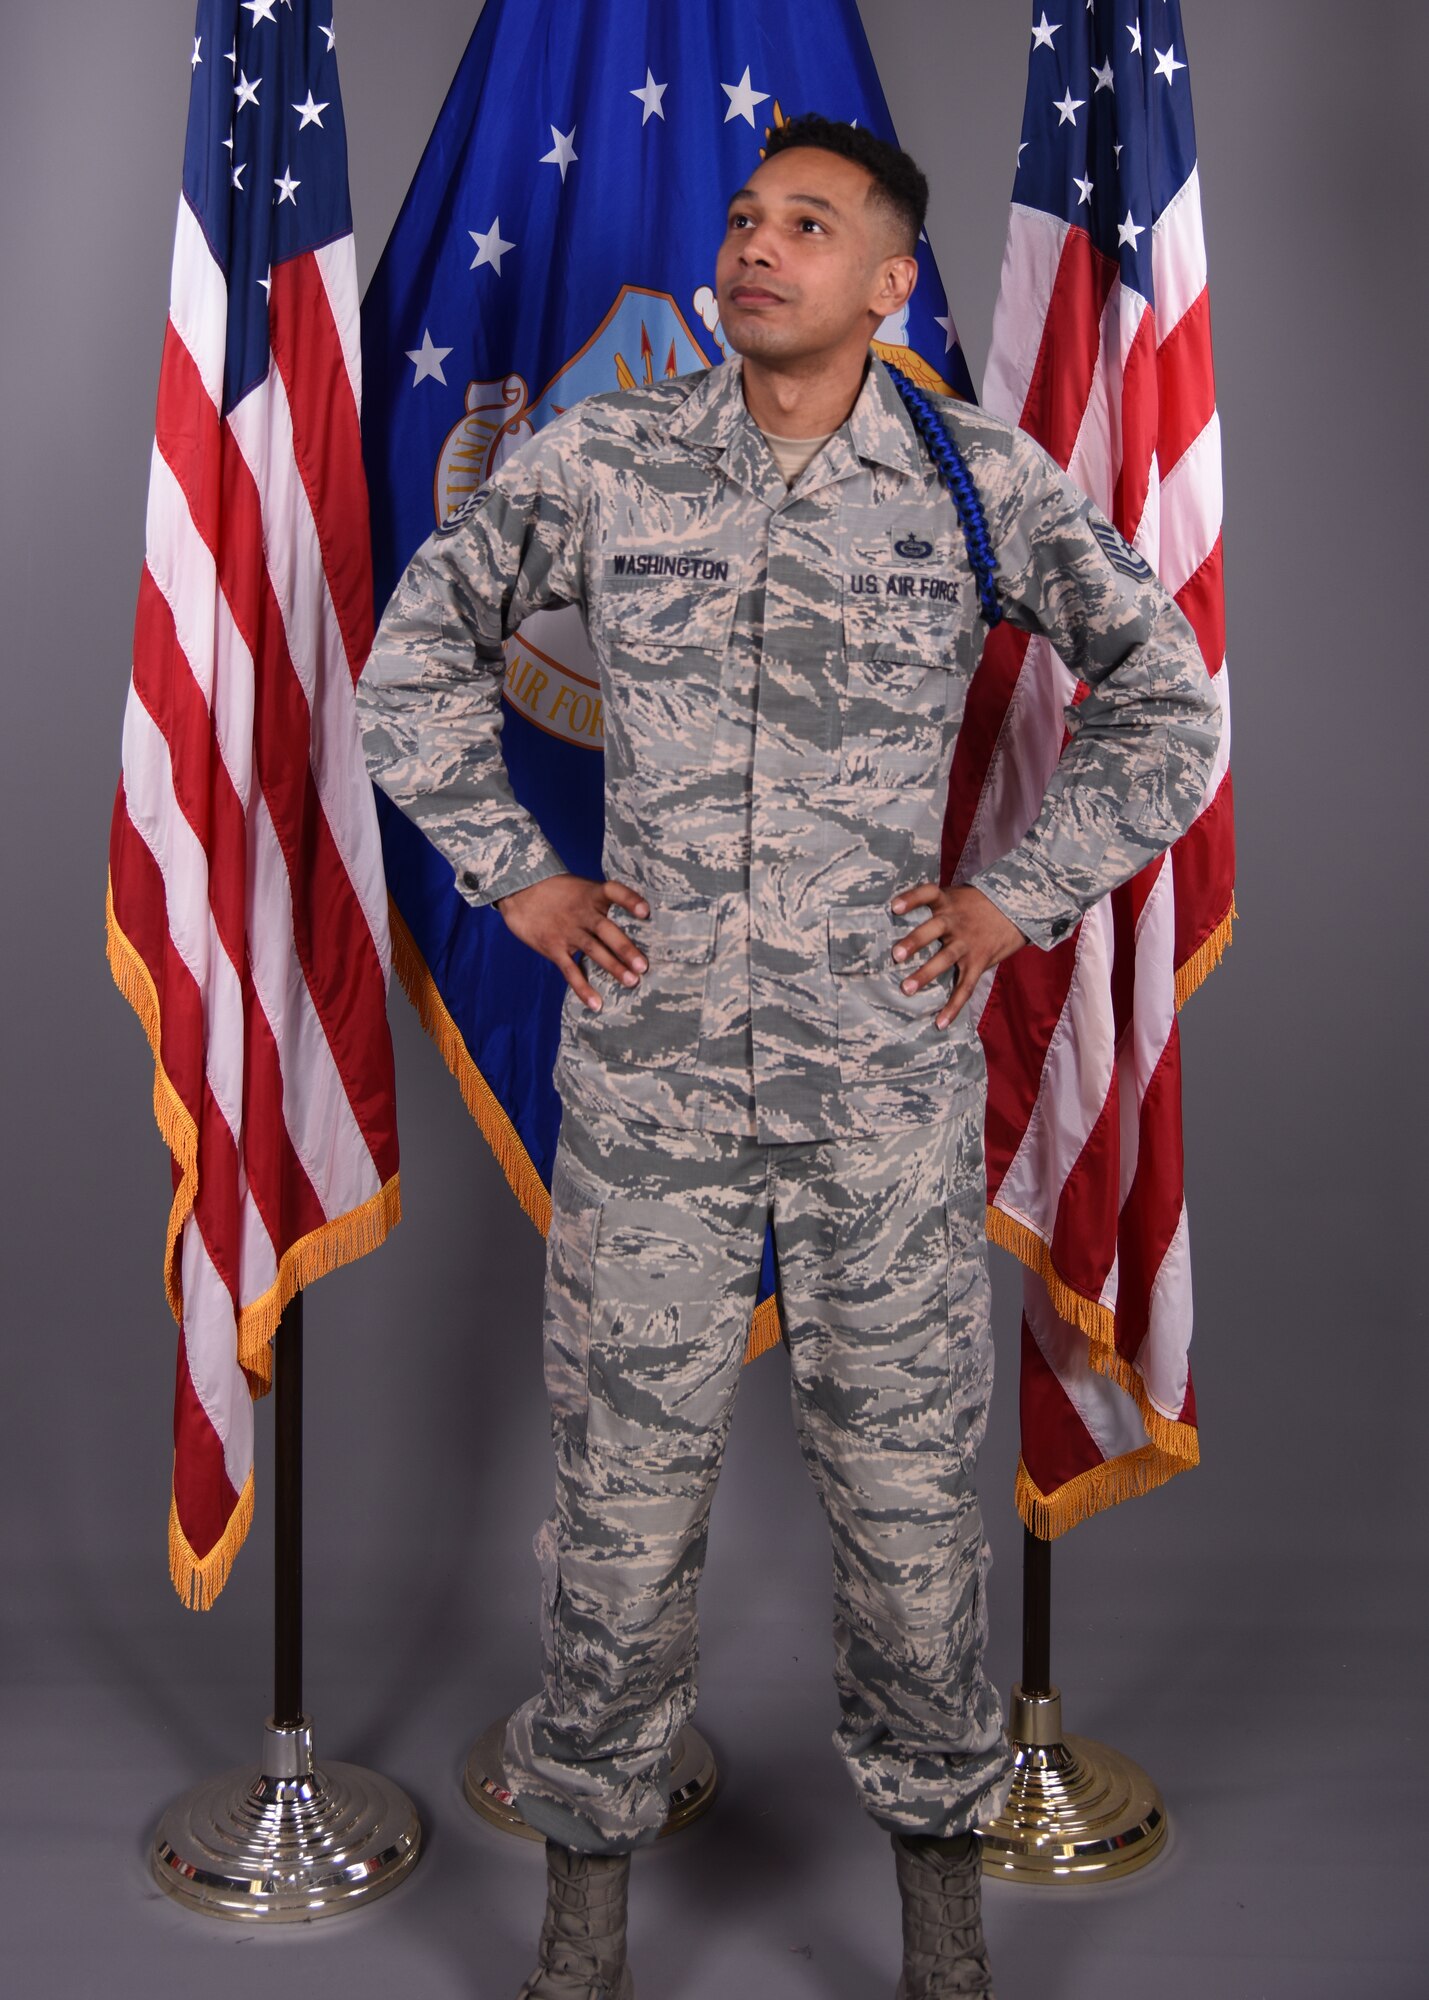 U.S. Air Force Tech. Sgt. Joseph Washington, 315th Training Squadron assistant flight chief and master MTL, displays his new royal and dark blue colored aiguillette in the 17th Training Wing Public Affairs photo studio on Goodfellow Air Force Base, Texas, Feb. 12, 2020. The aiguillette physically distinguishes Washington as a beacon to mentor, train and lead not only technical training students, but other MTLs. (U.S. Air Force photo by Airman 1st Class Abbey Rieves)